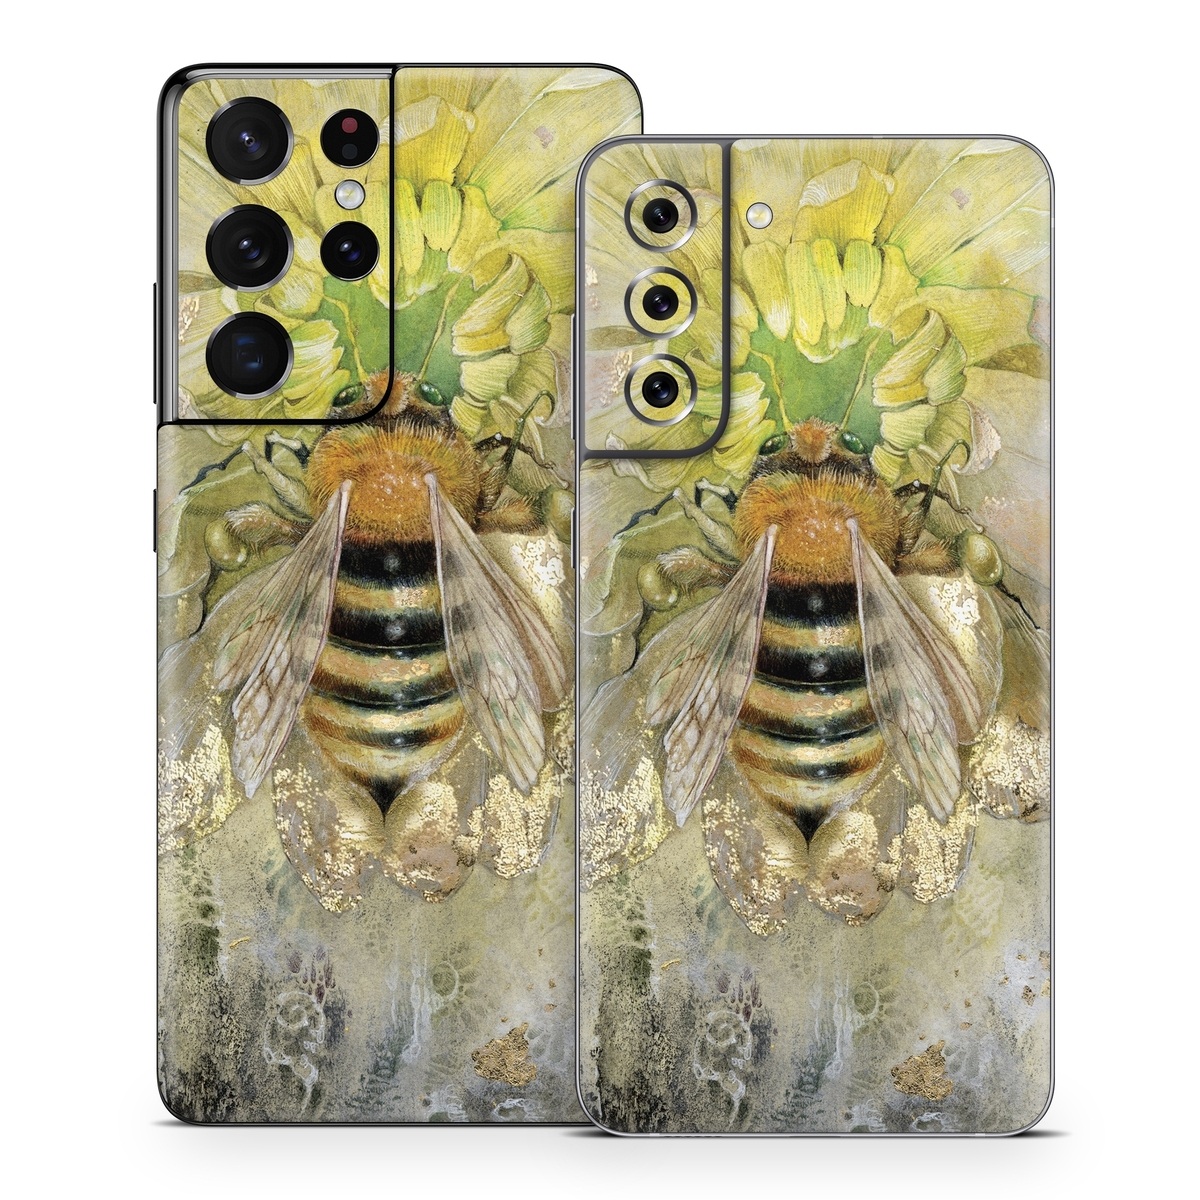 Samsung Galaxy S21 Series Skin design of Honeybee, Insect, Bee, Membrane-winged insect, Invertebrate, Pest, Watercolor paint, Pollinator, Illustration, Organism, with yellow, orange, black, green, gray, pink colors